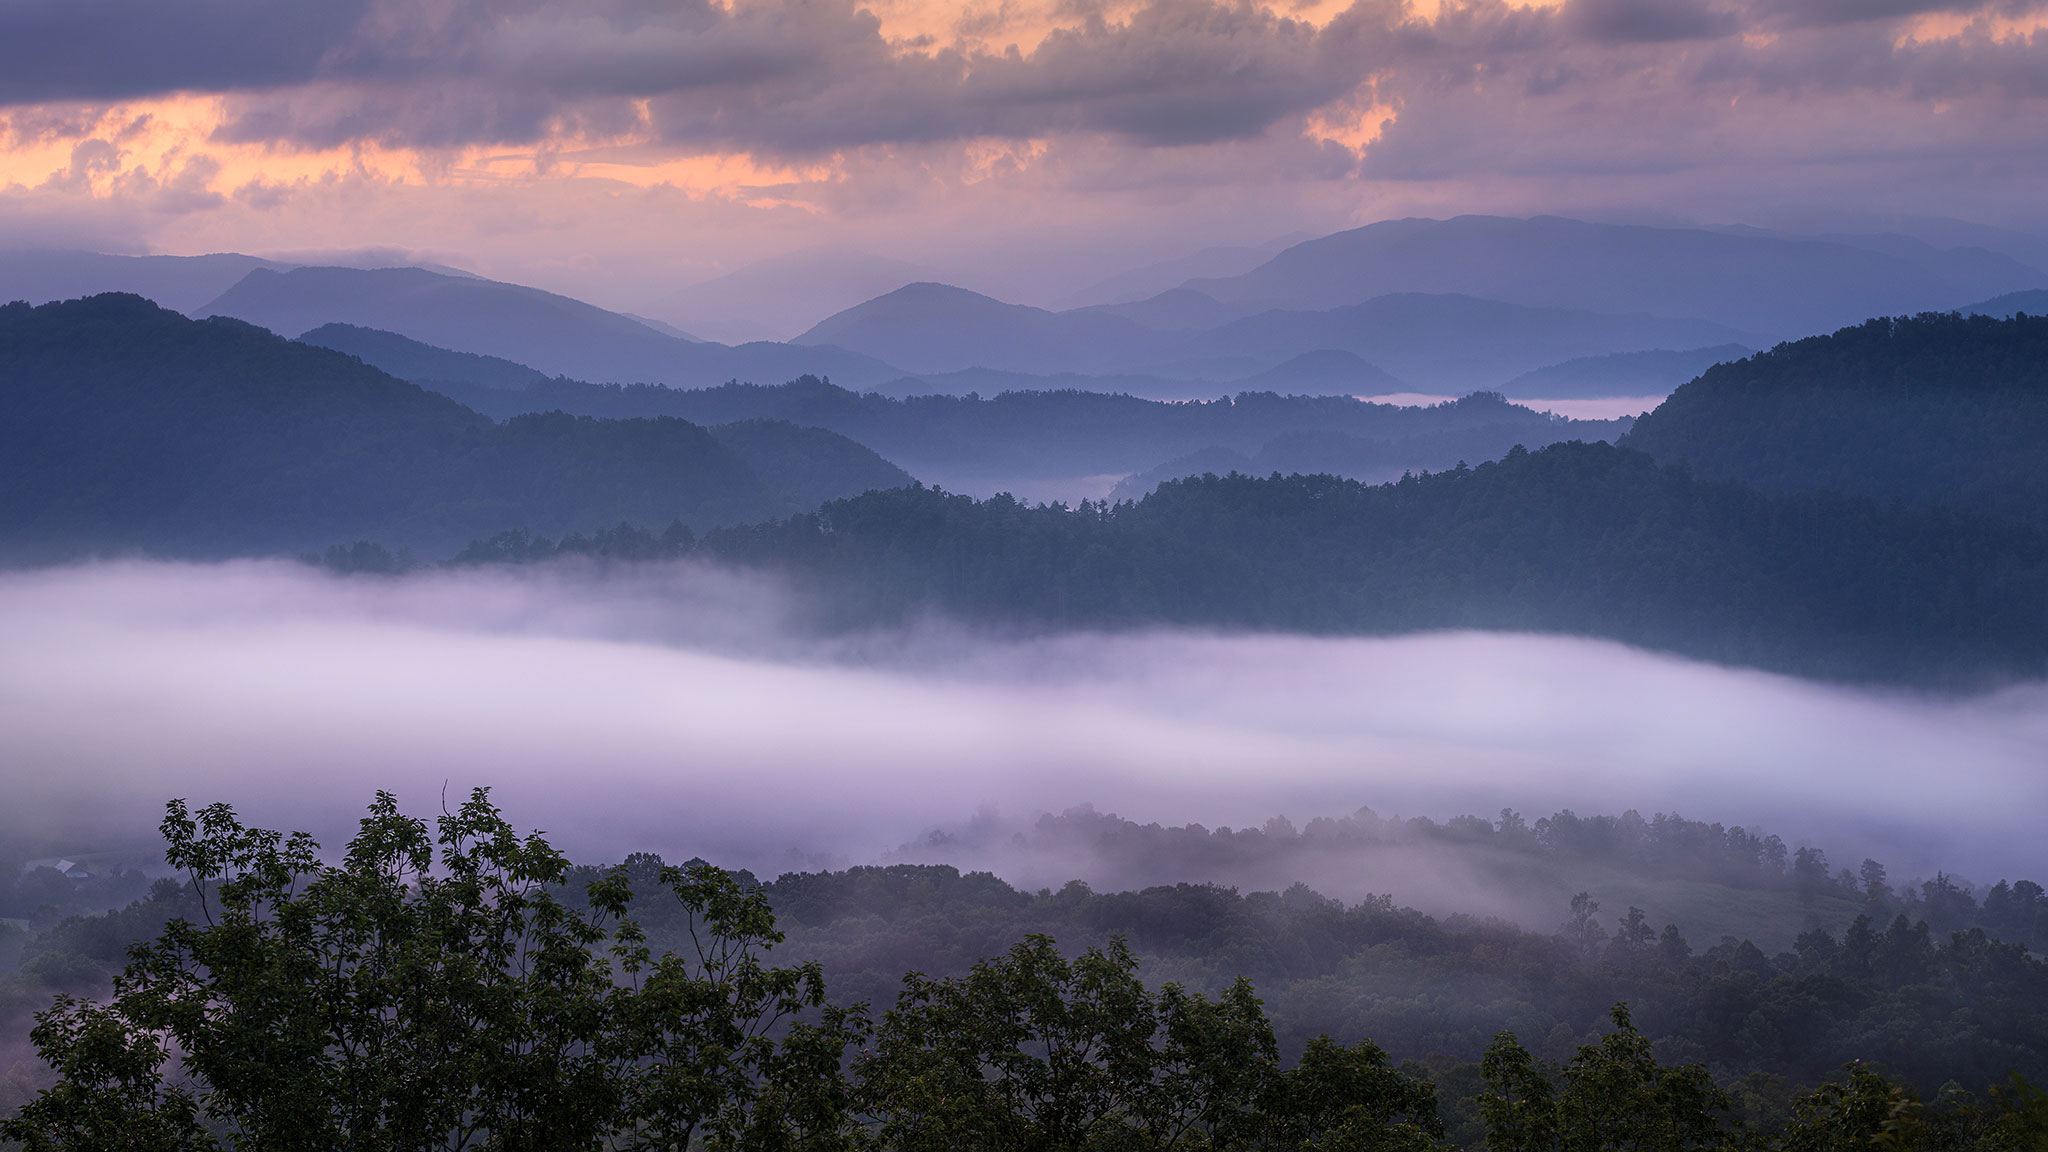 The Smoky Mountains photographed from the Foothills Parkway